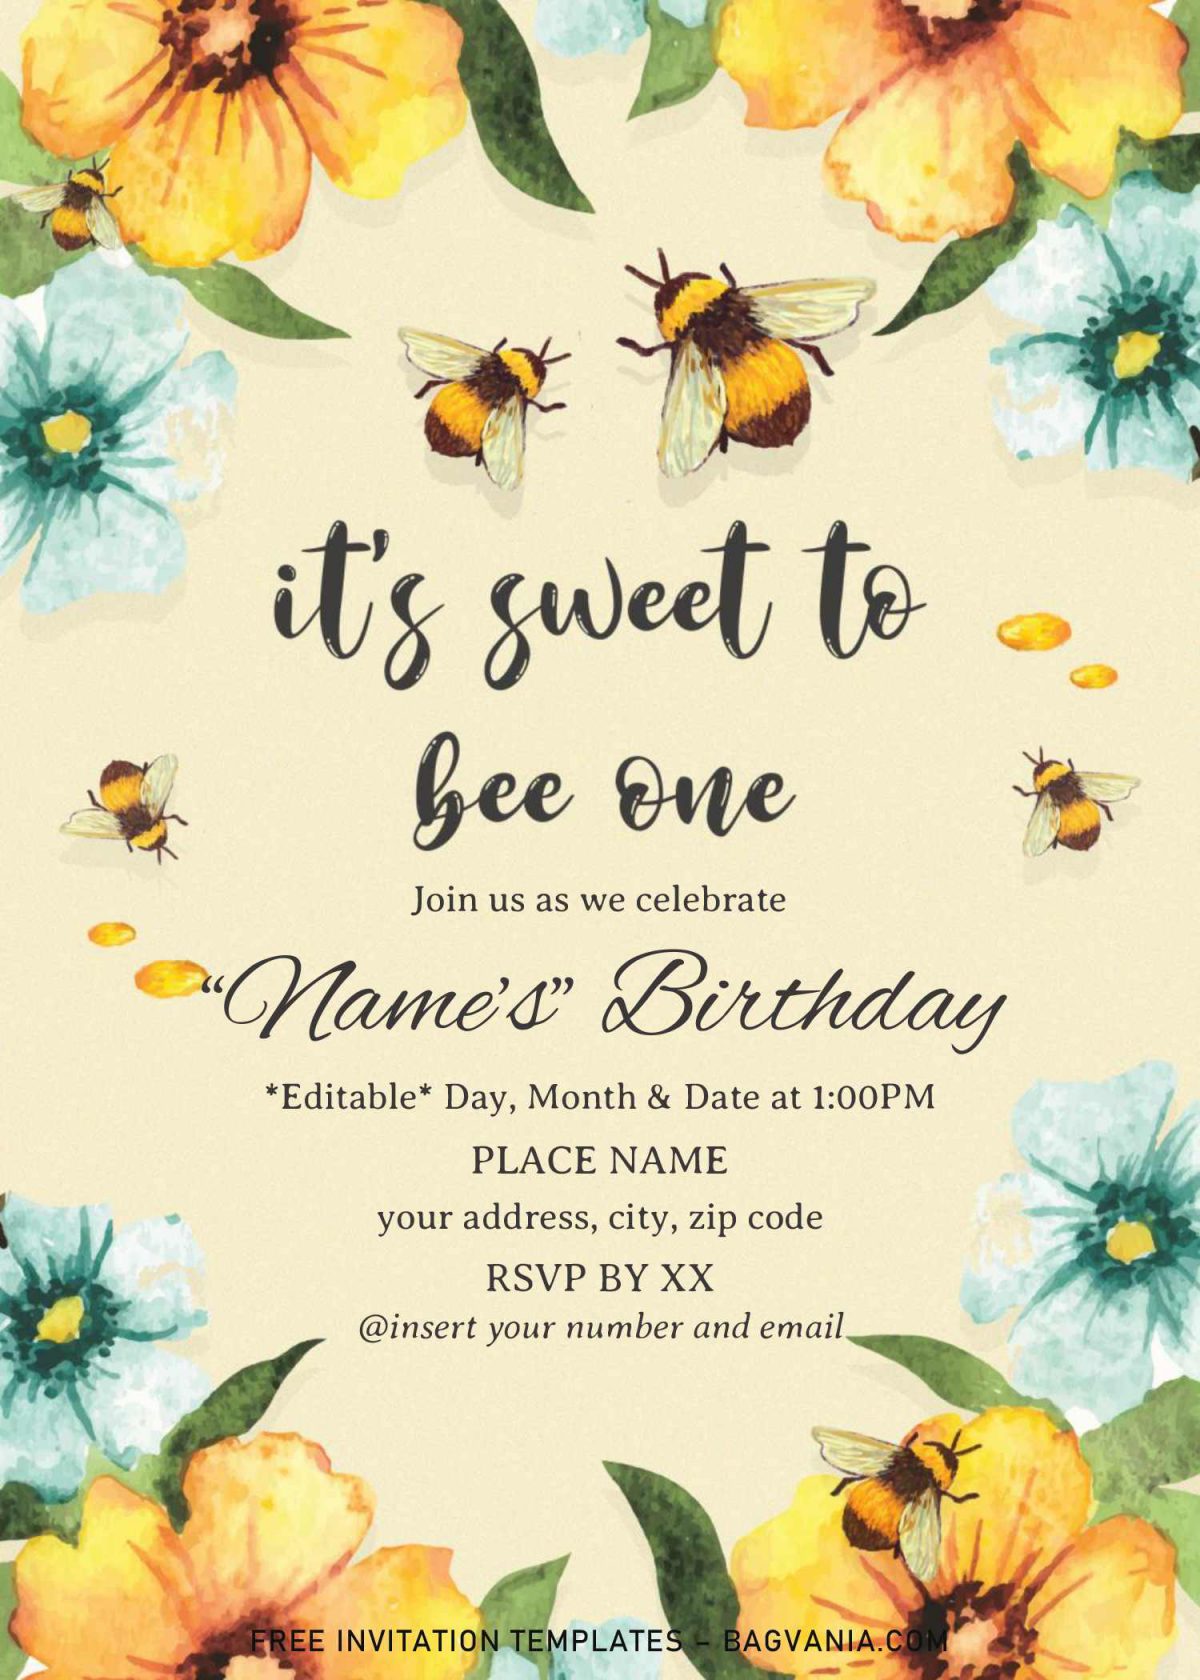 First Bee Day Birthday Invitation Templates - Editable .Docx and has cute and beautiful font styles